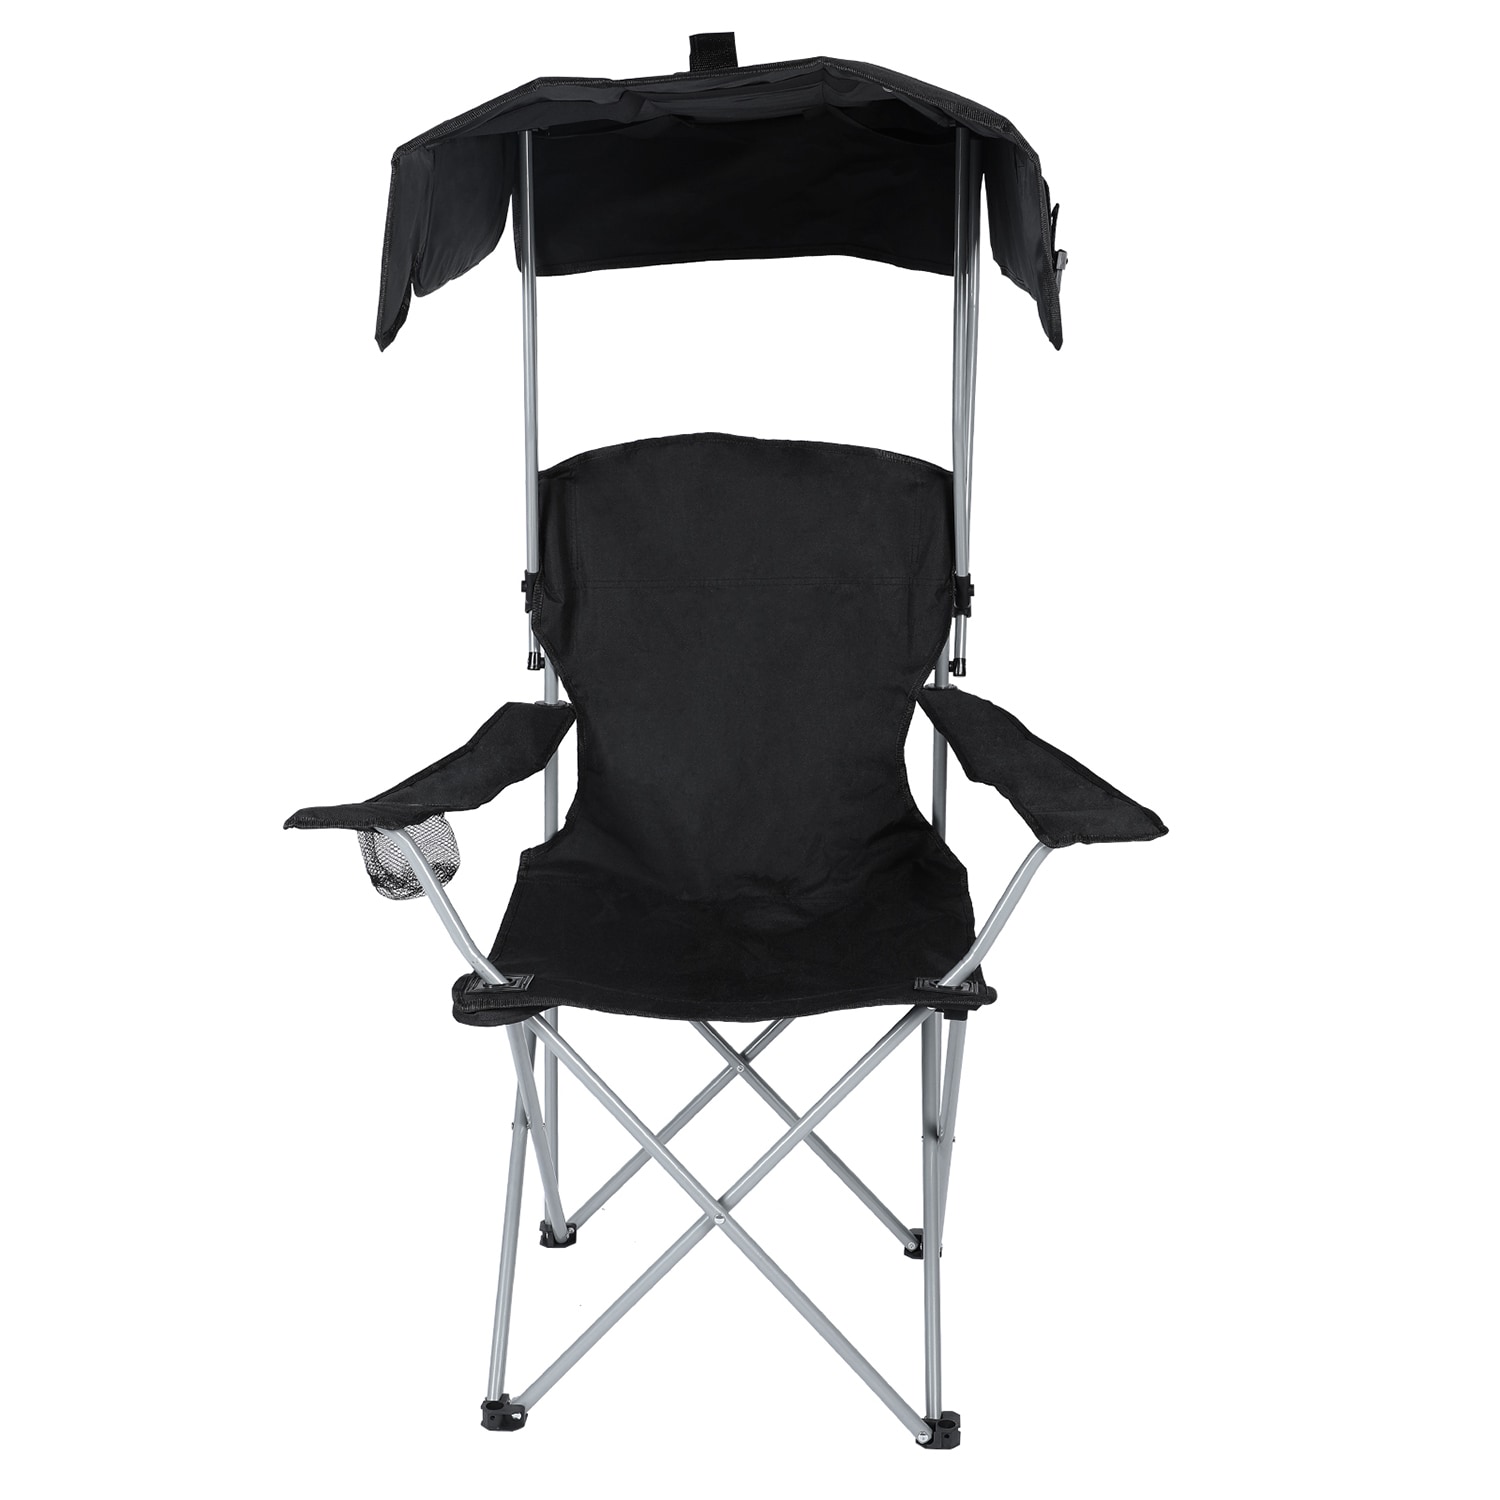 Outdoor Portable Folding Chair, Combat Readiness , Fishing Stool, Travel  Camping Horse, Strong and Light Line Up 